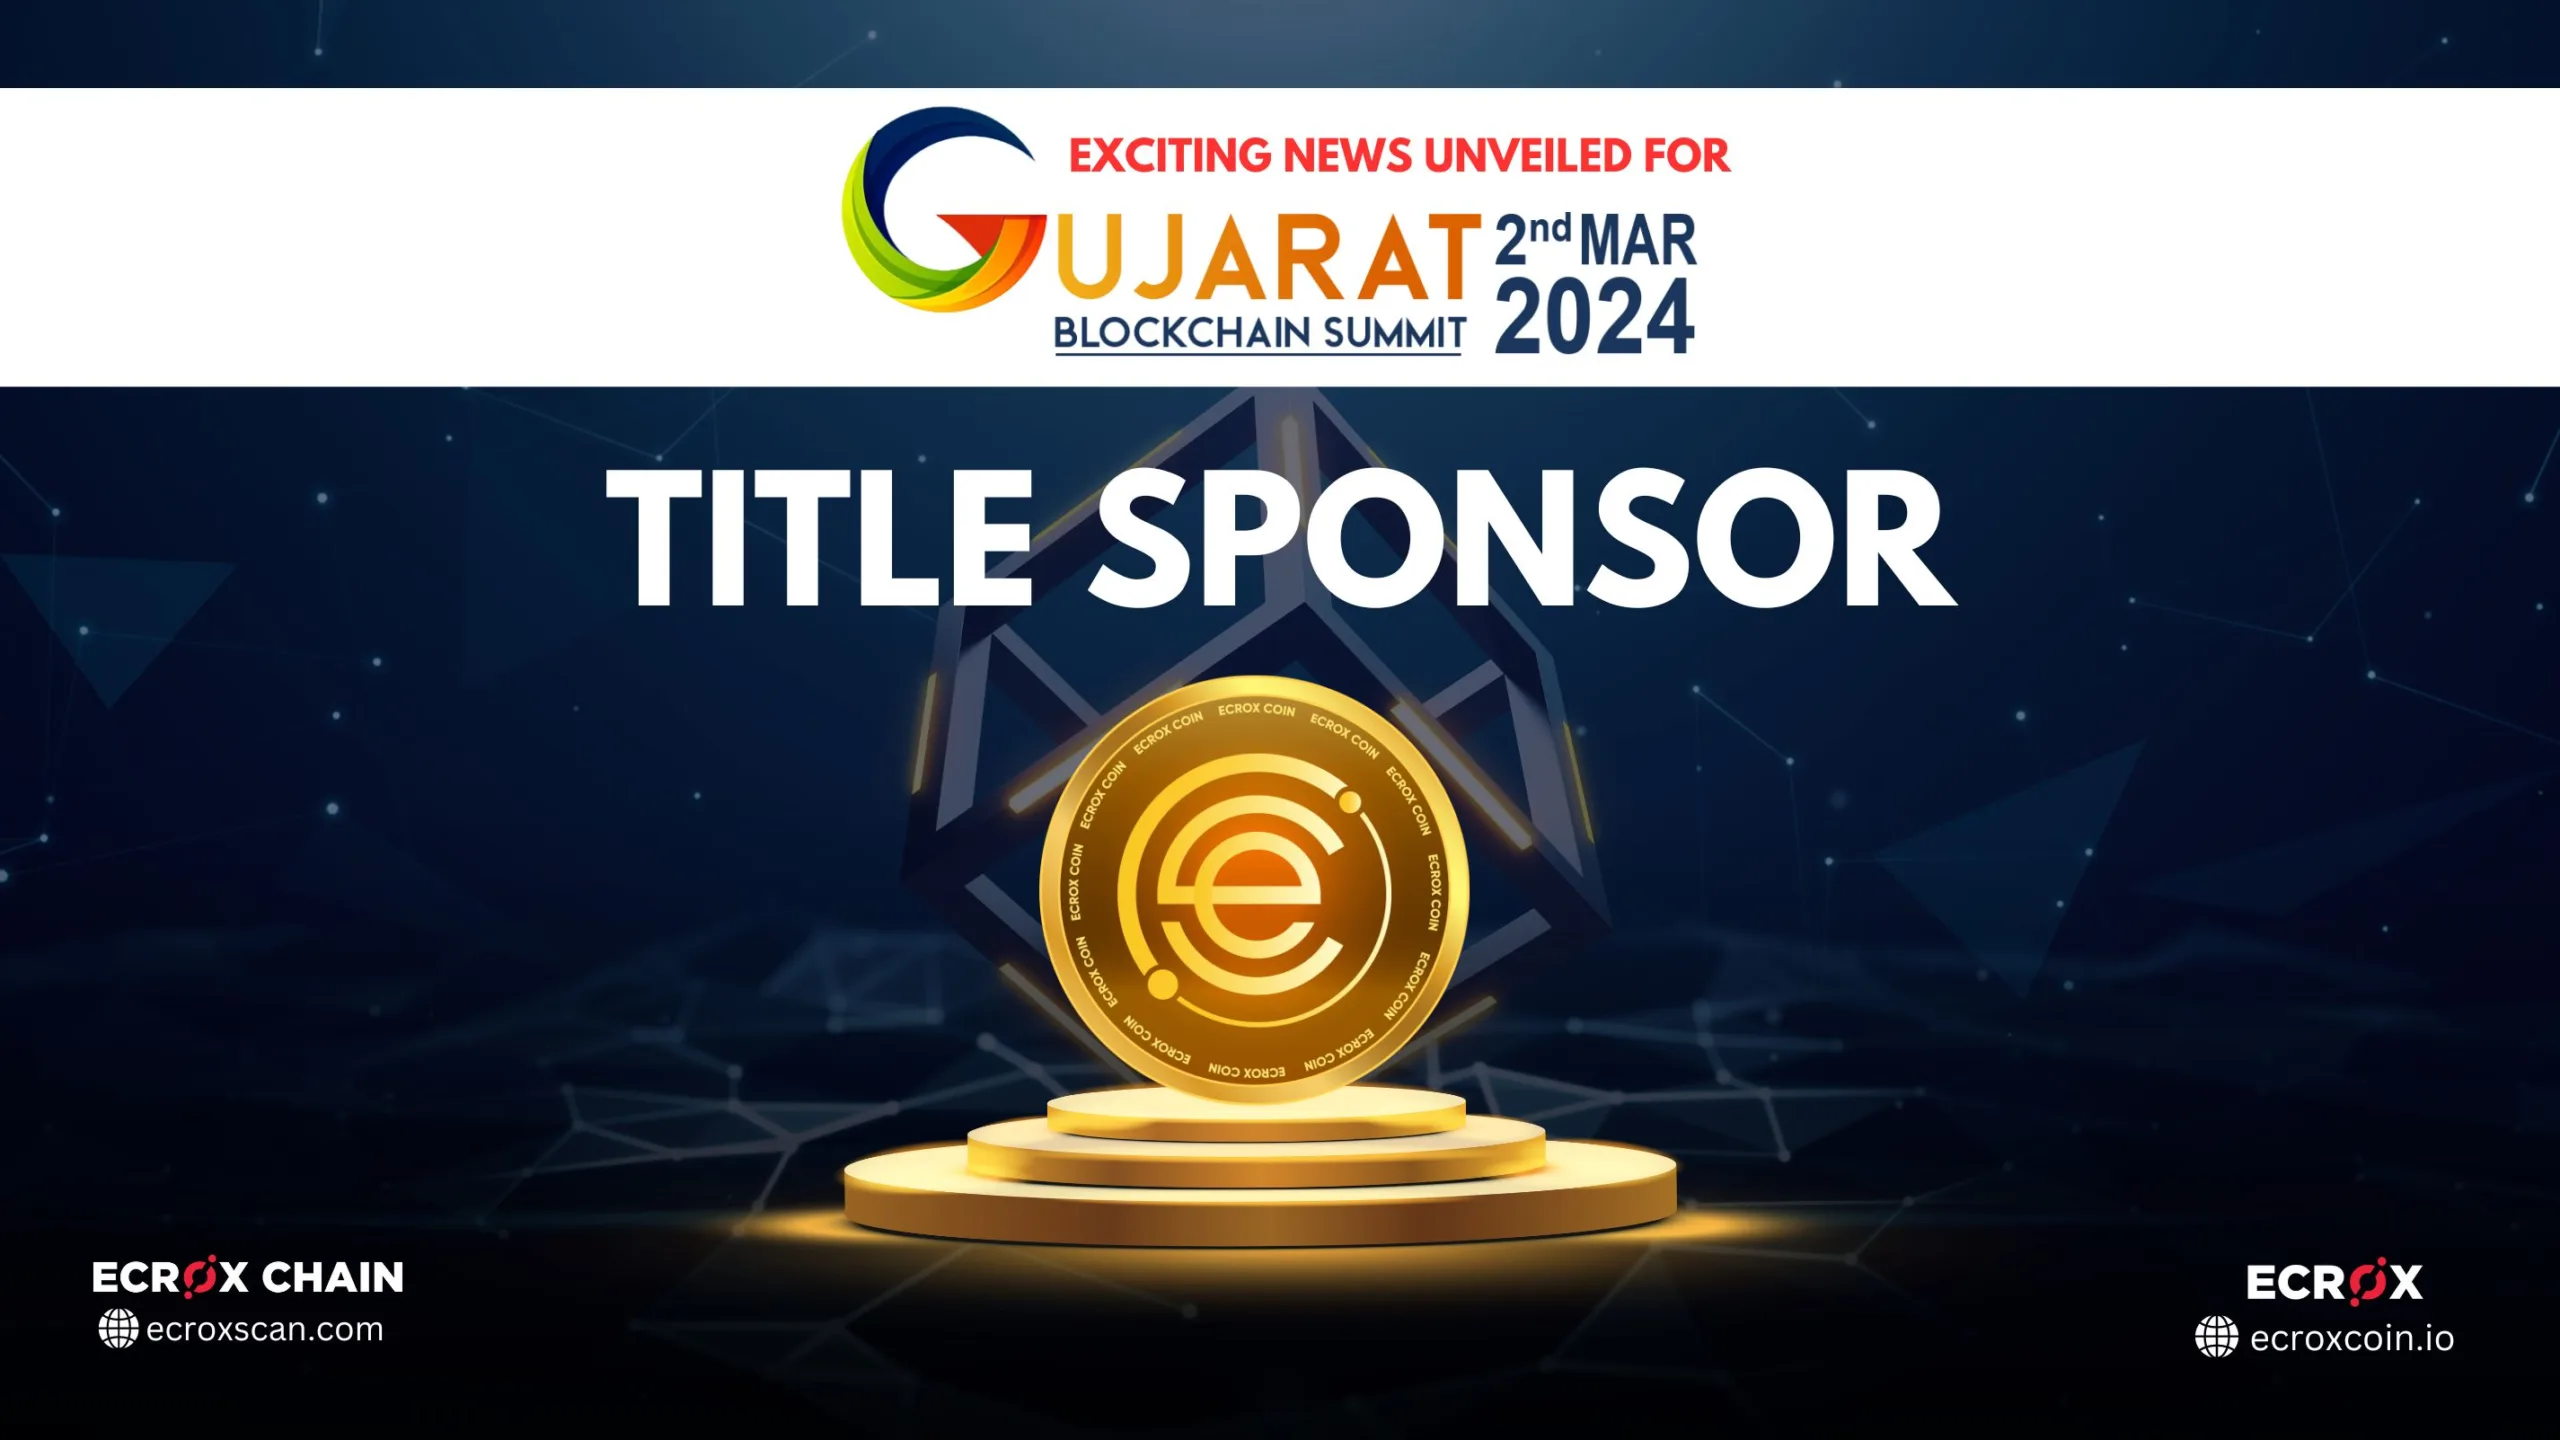 The Official Title Sponsor for Gujarat Blockchain Summit 2024: ECROX CHAIN